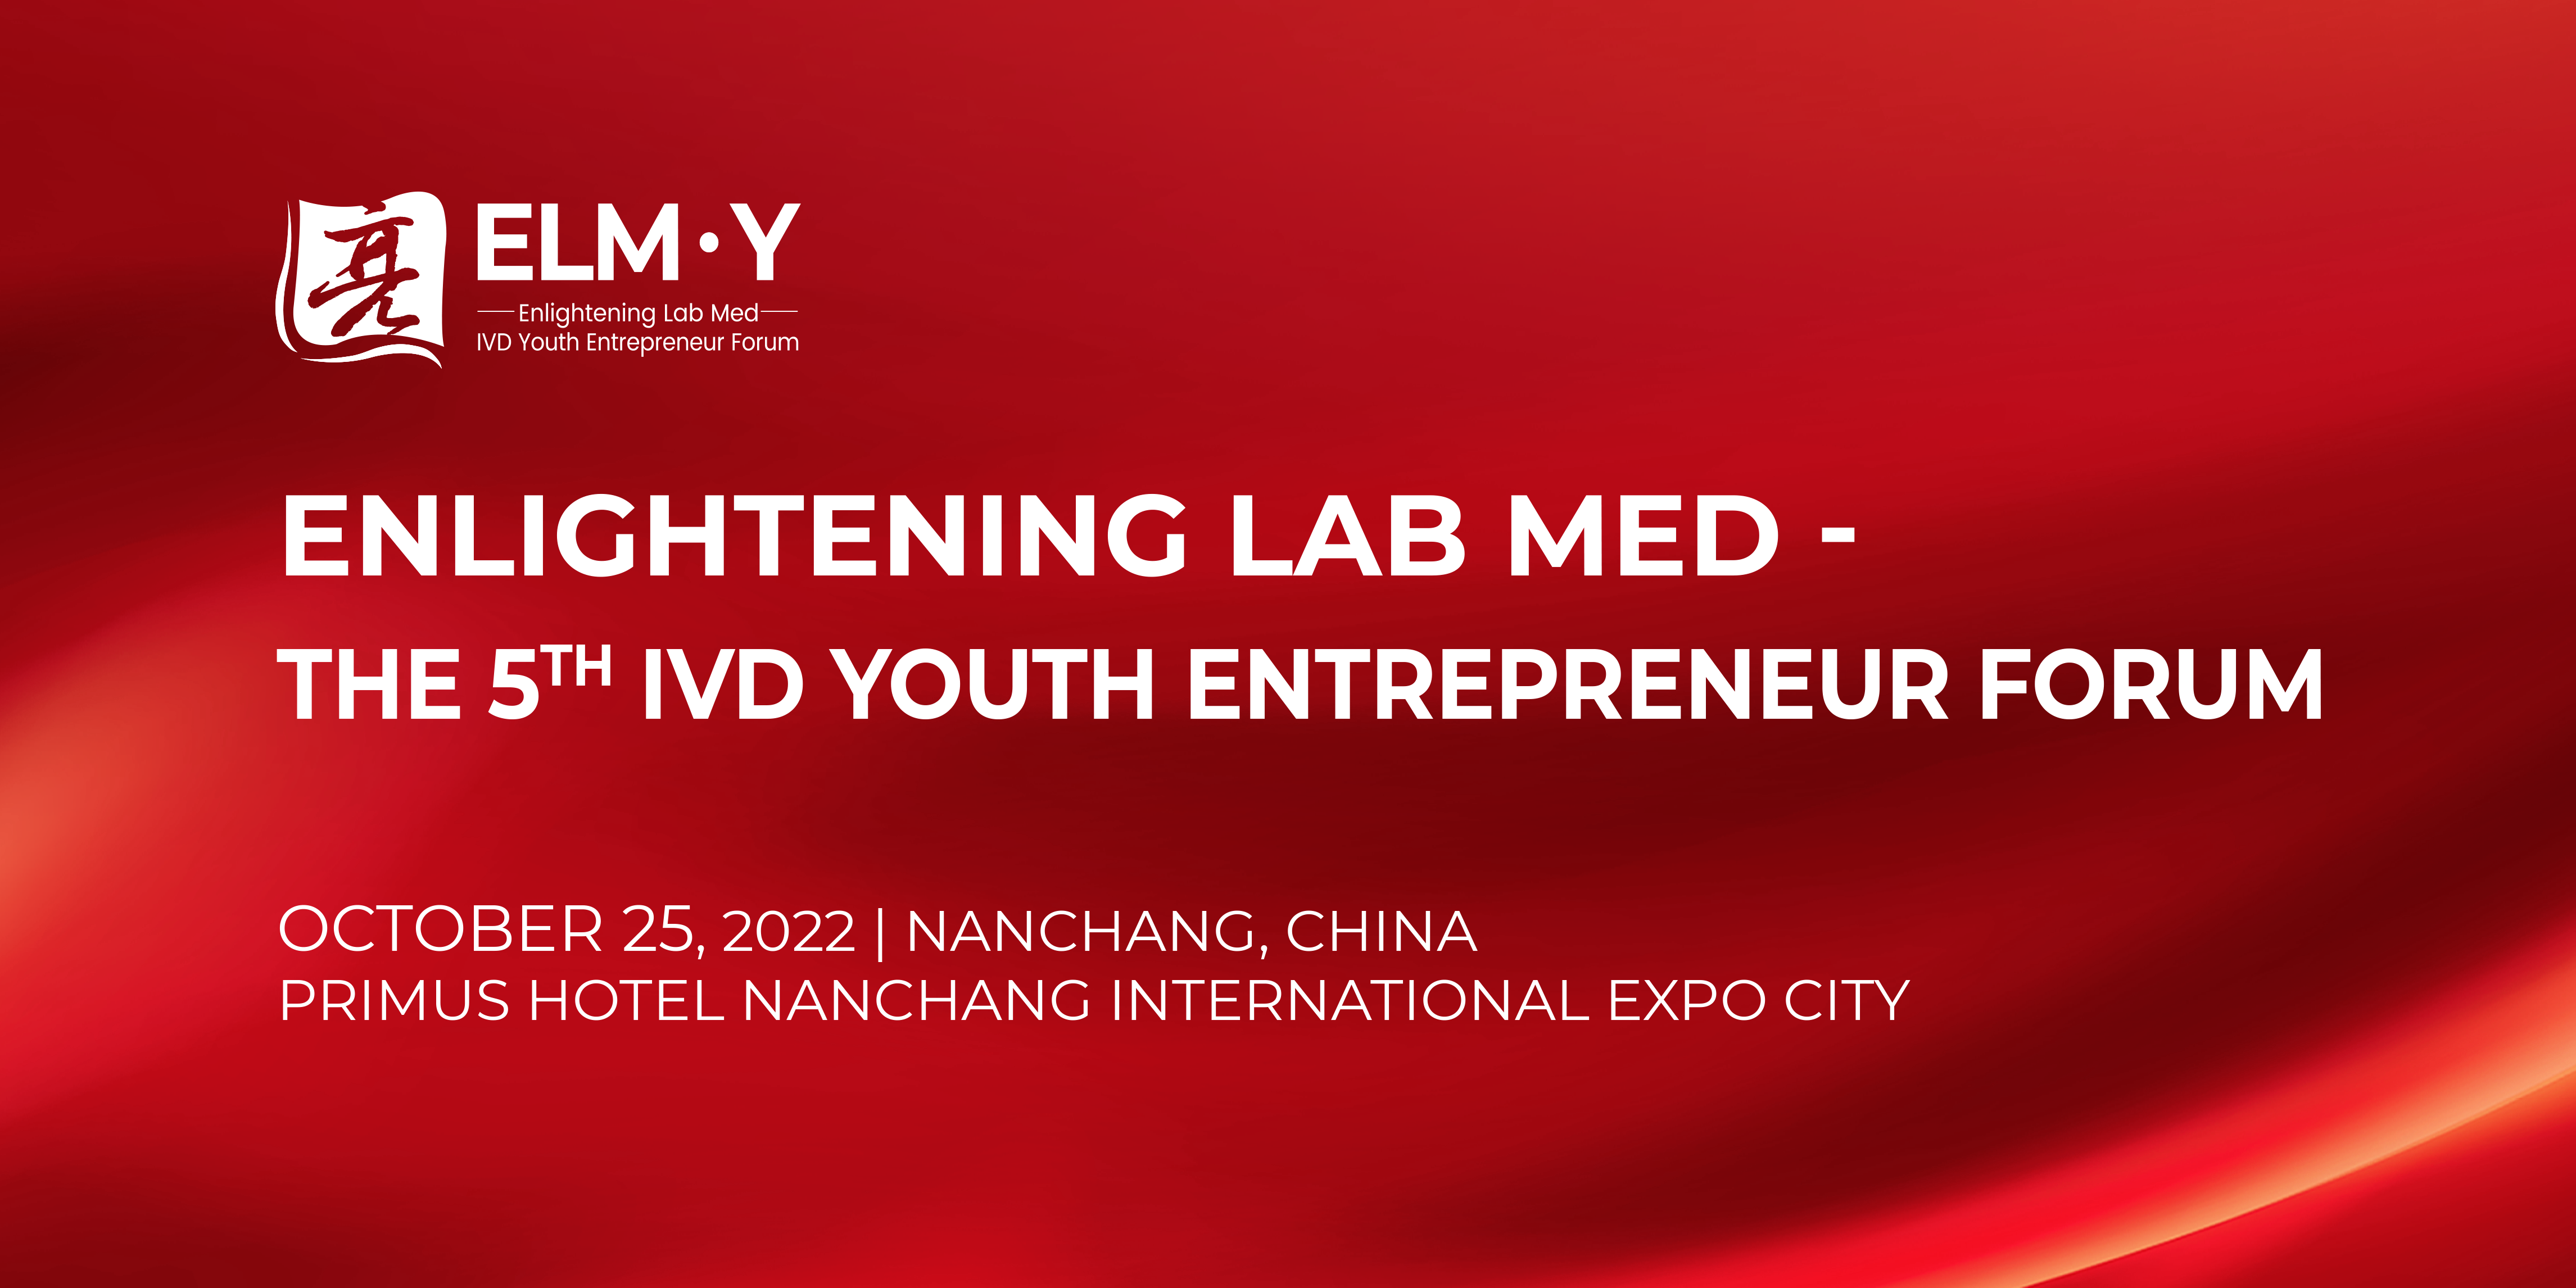 The Success of Enlightening Lab Med―the 5th Youth Entrepreneur Forum